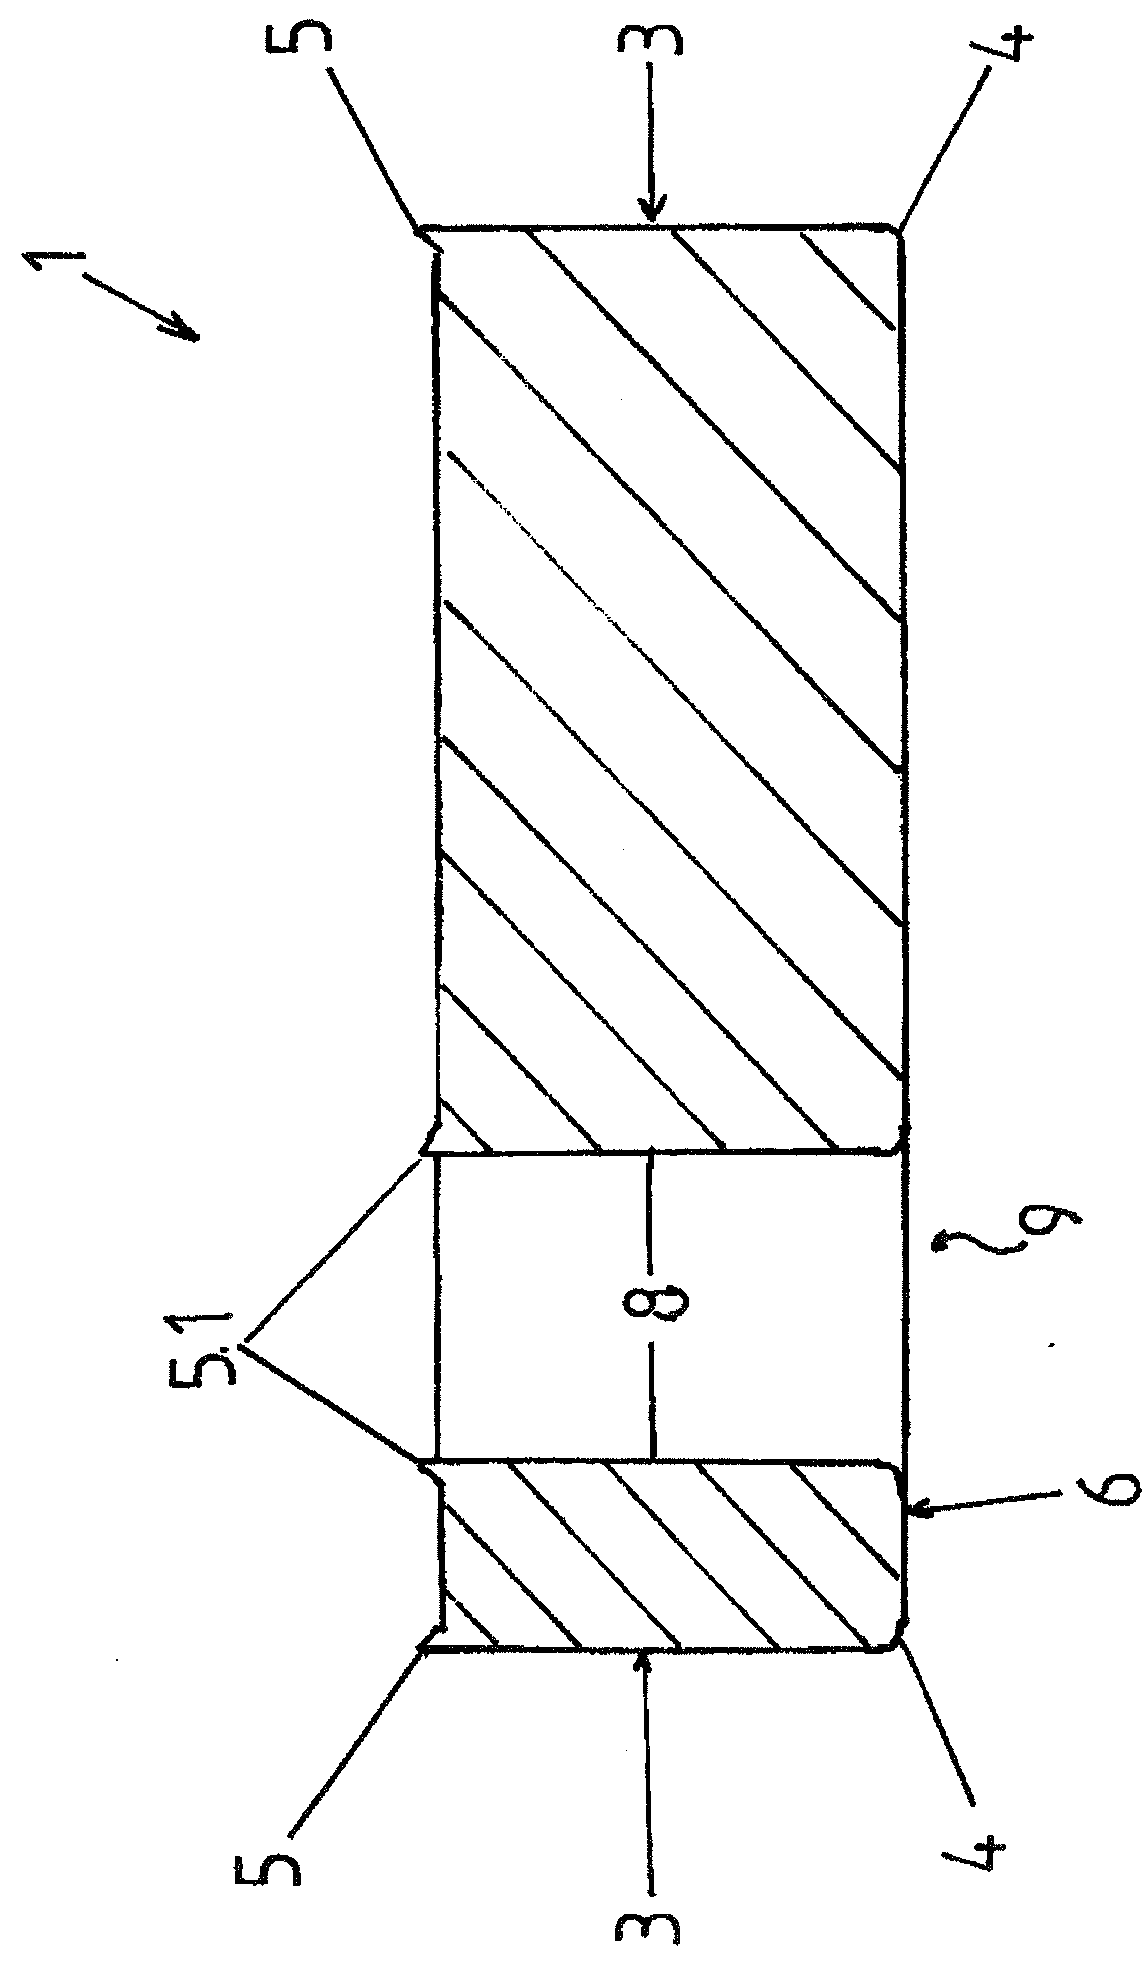 Device and method for shaping sheared edges on stamped or fine-blanked parts having a burr